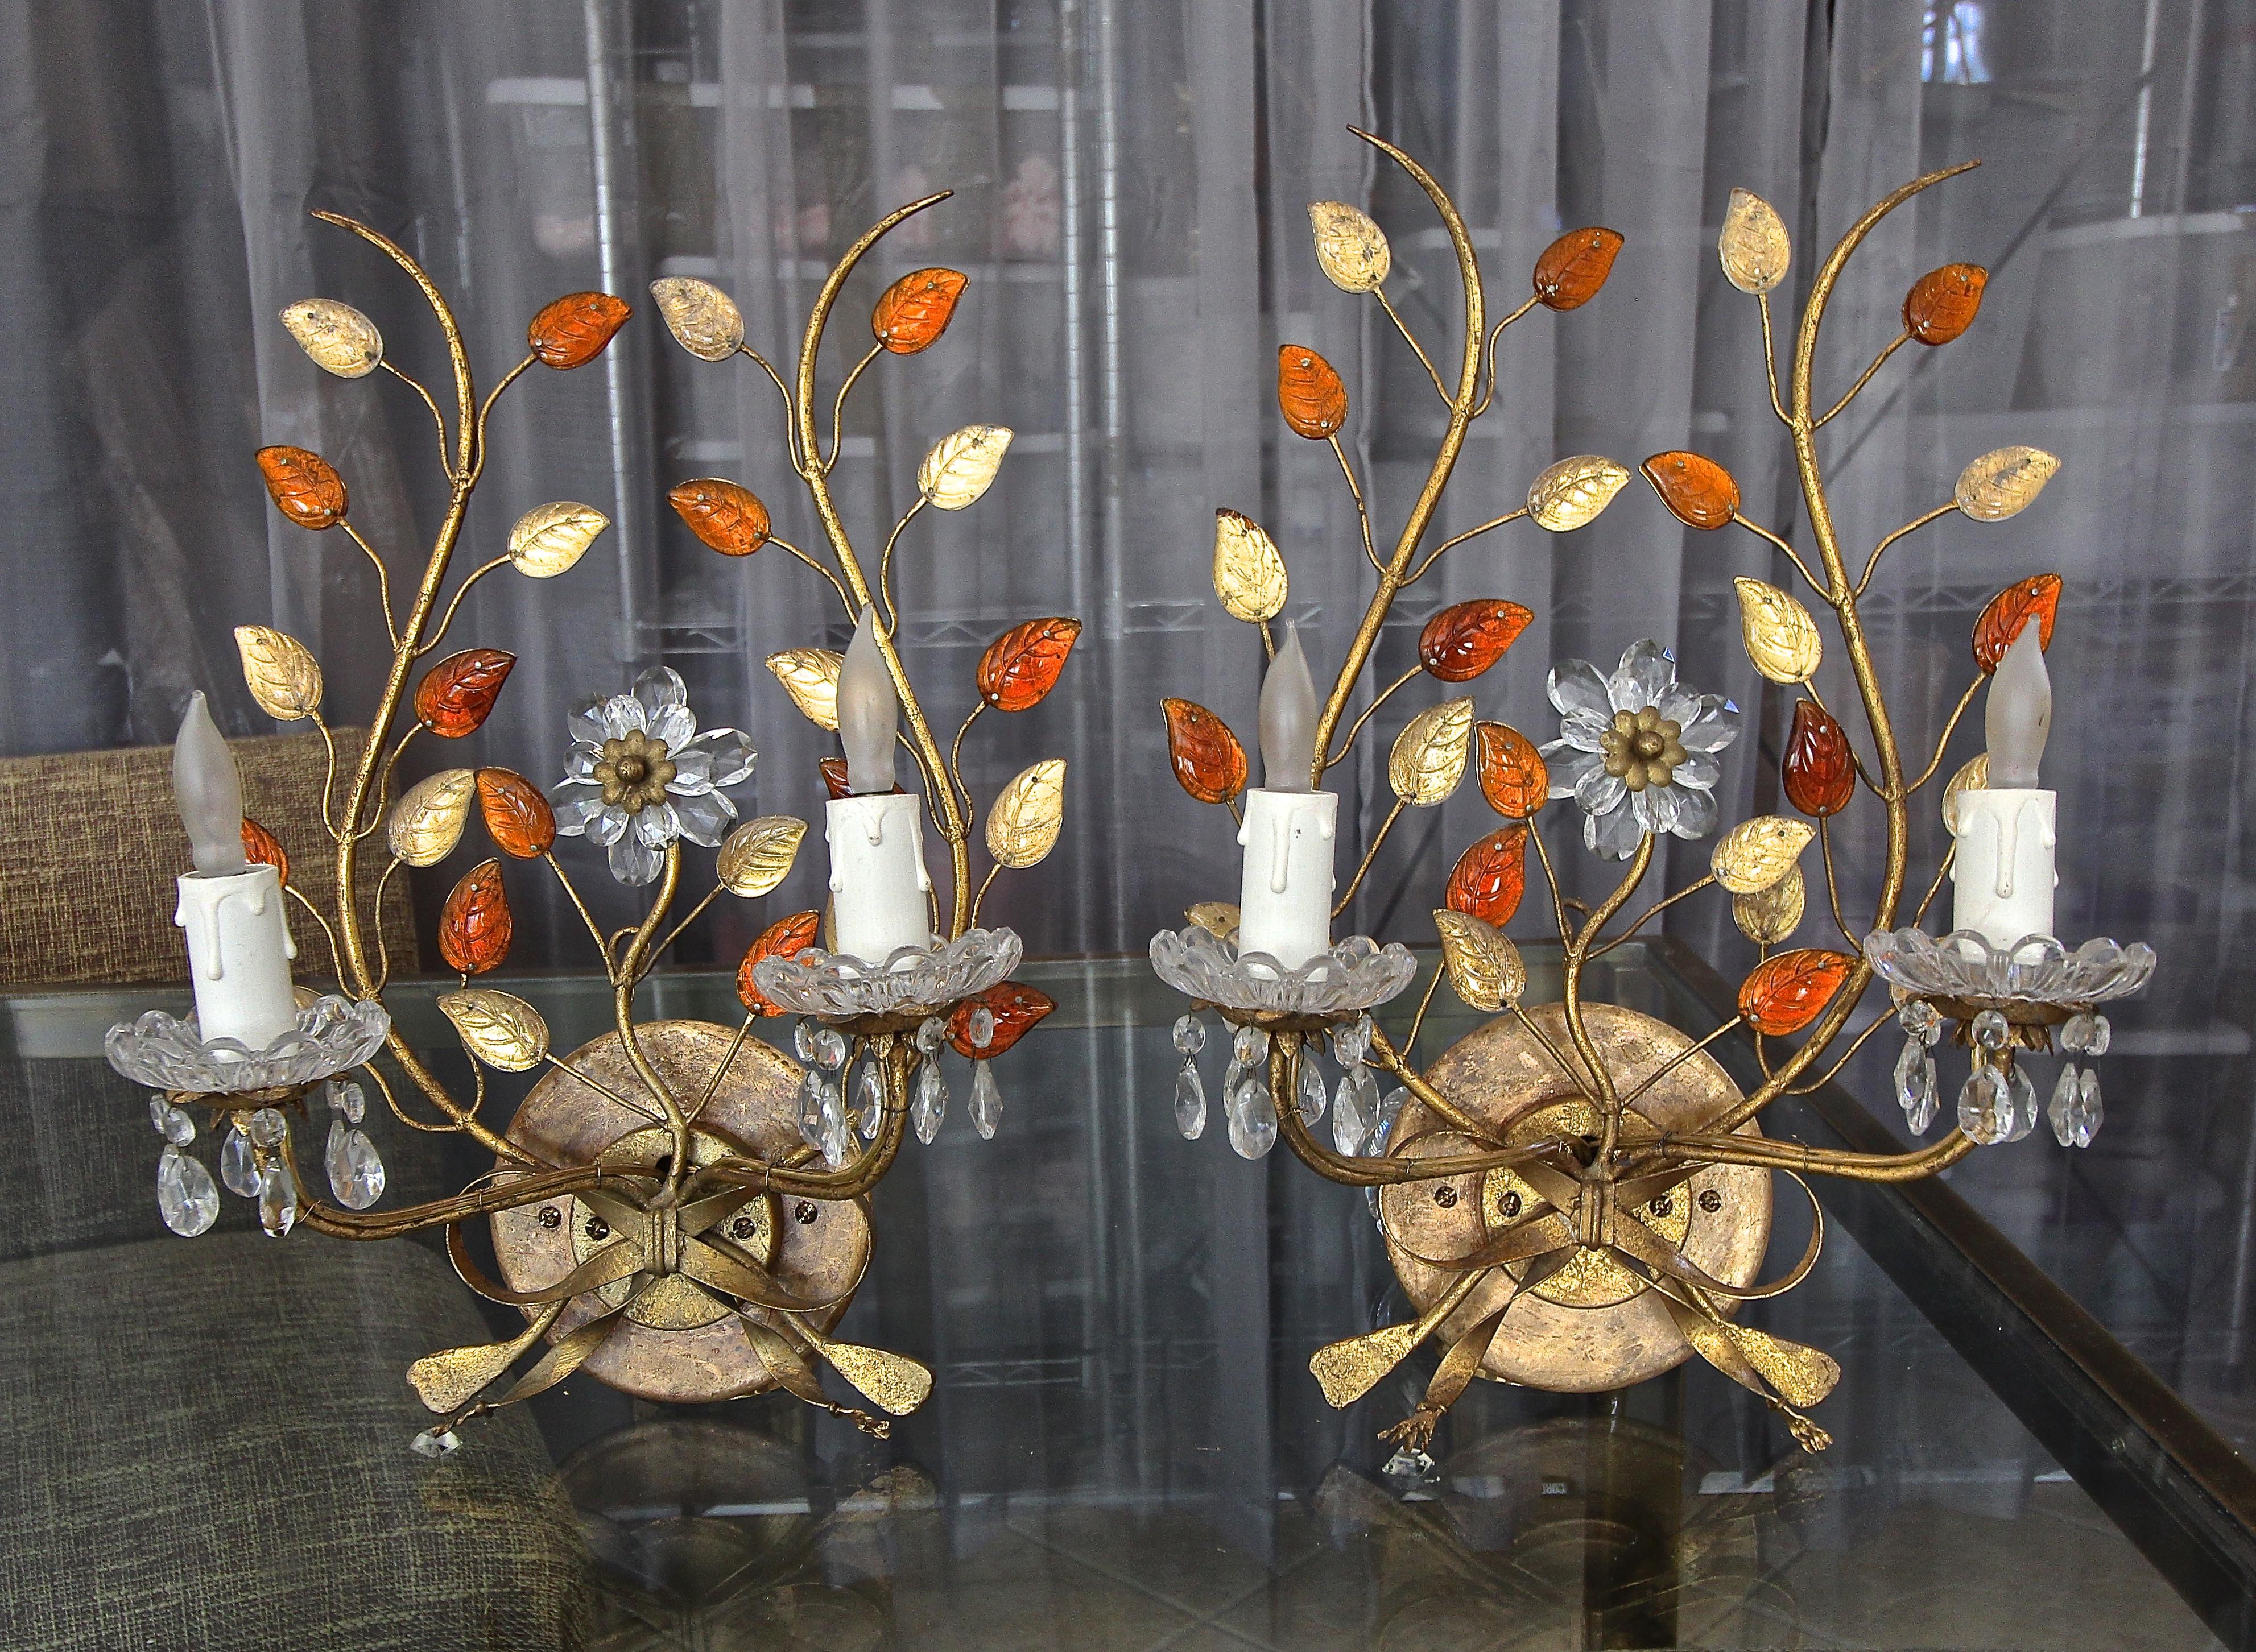 Pair of elegant 1940s gilt metal two-light wall sconces with a floral and leaf bouquet design. Detailing of the sconces includes clear and amber/ deep orange glass leaves, and crystal cup bobeches surrounded by dangling cut crystals prisms. Each